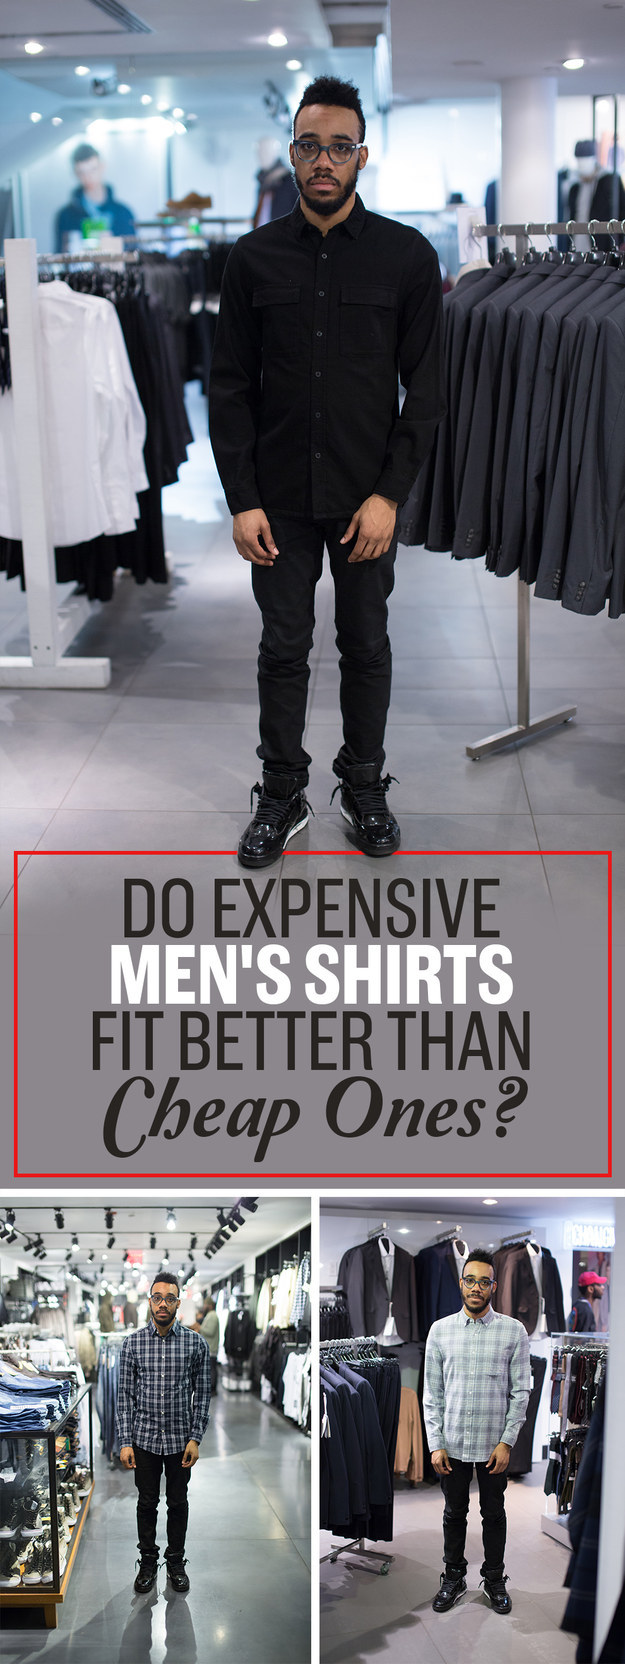 exposure World Record Guinness Book St How Expensive Men's Shirts Fit Vs. Cheap Ones